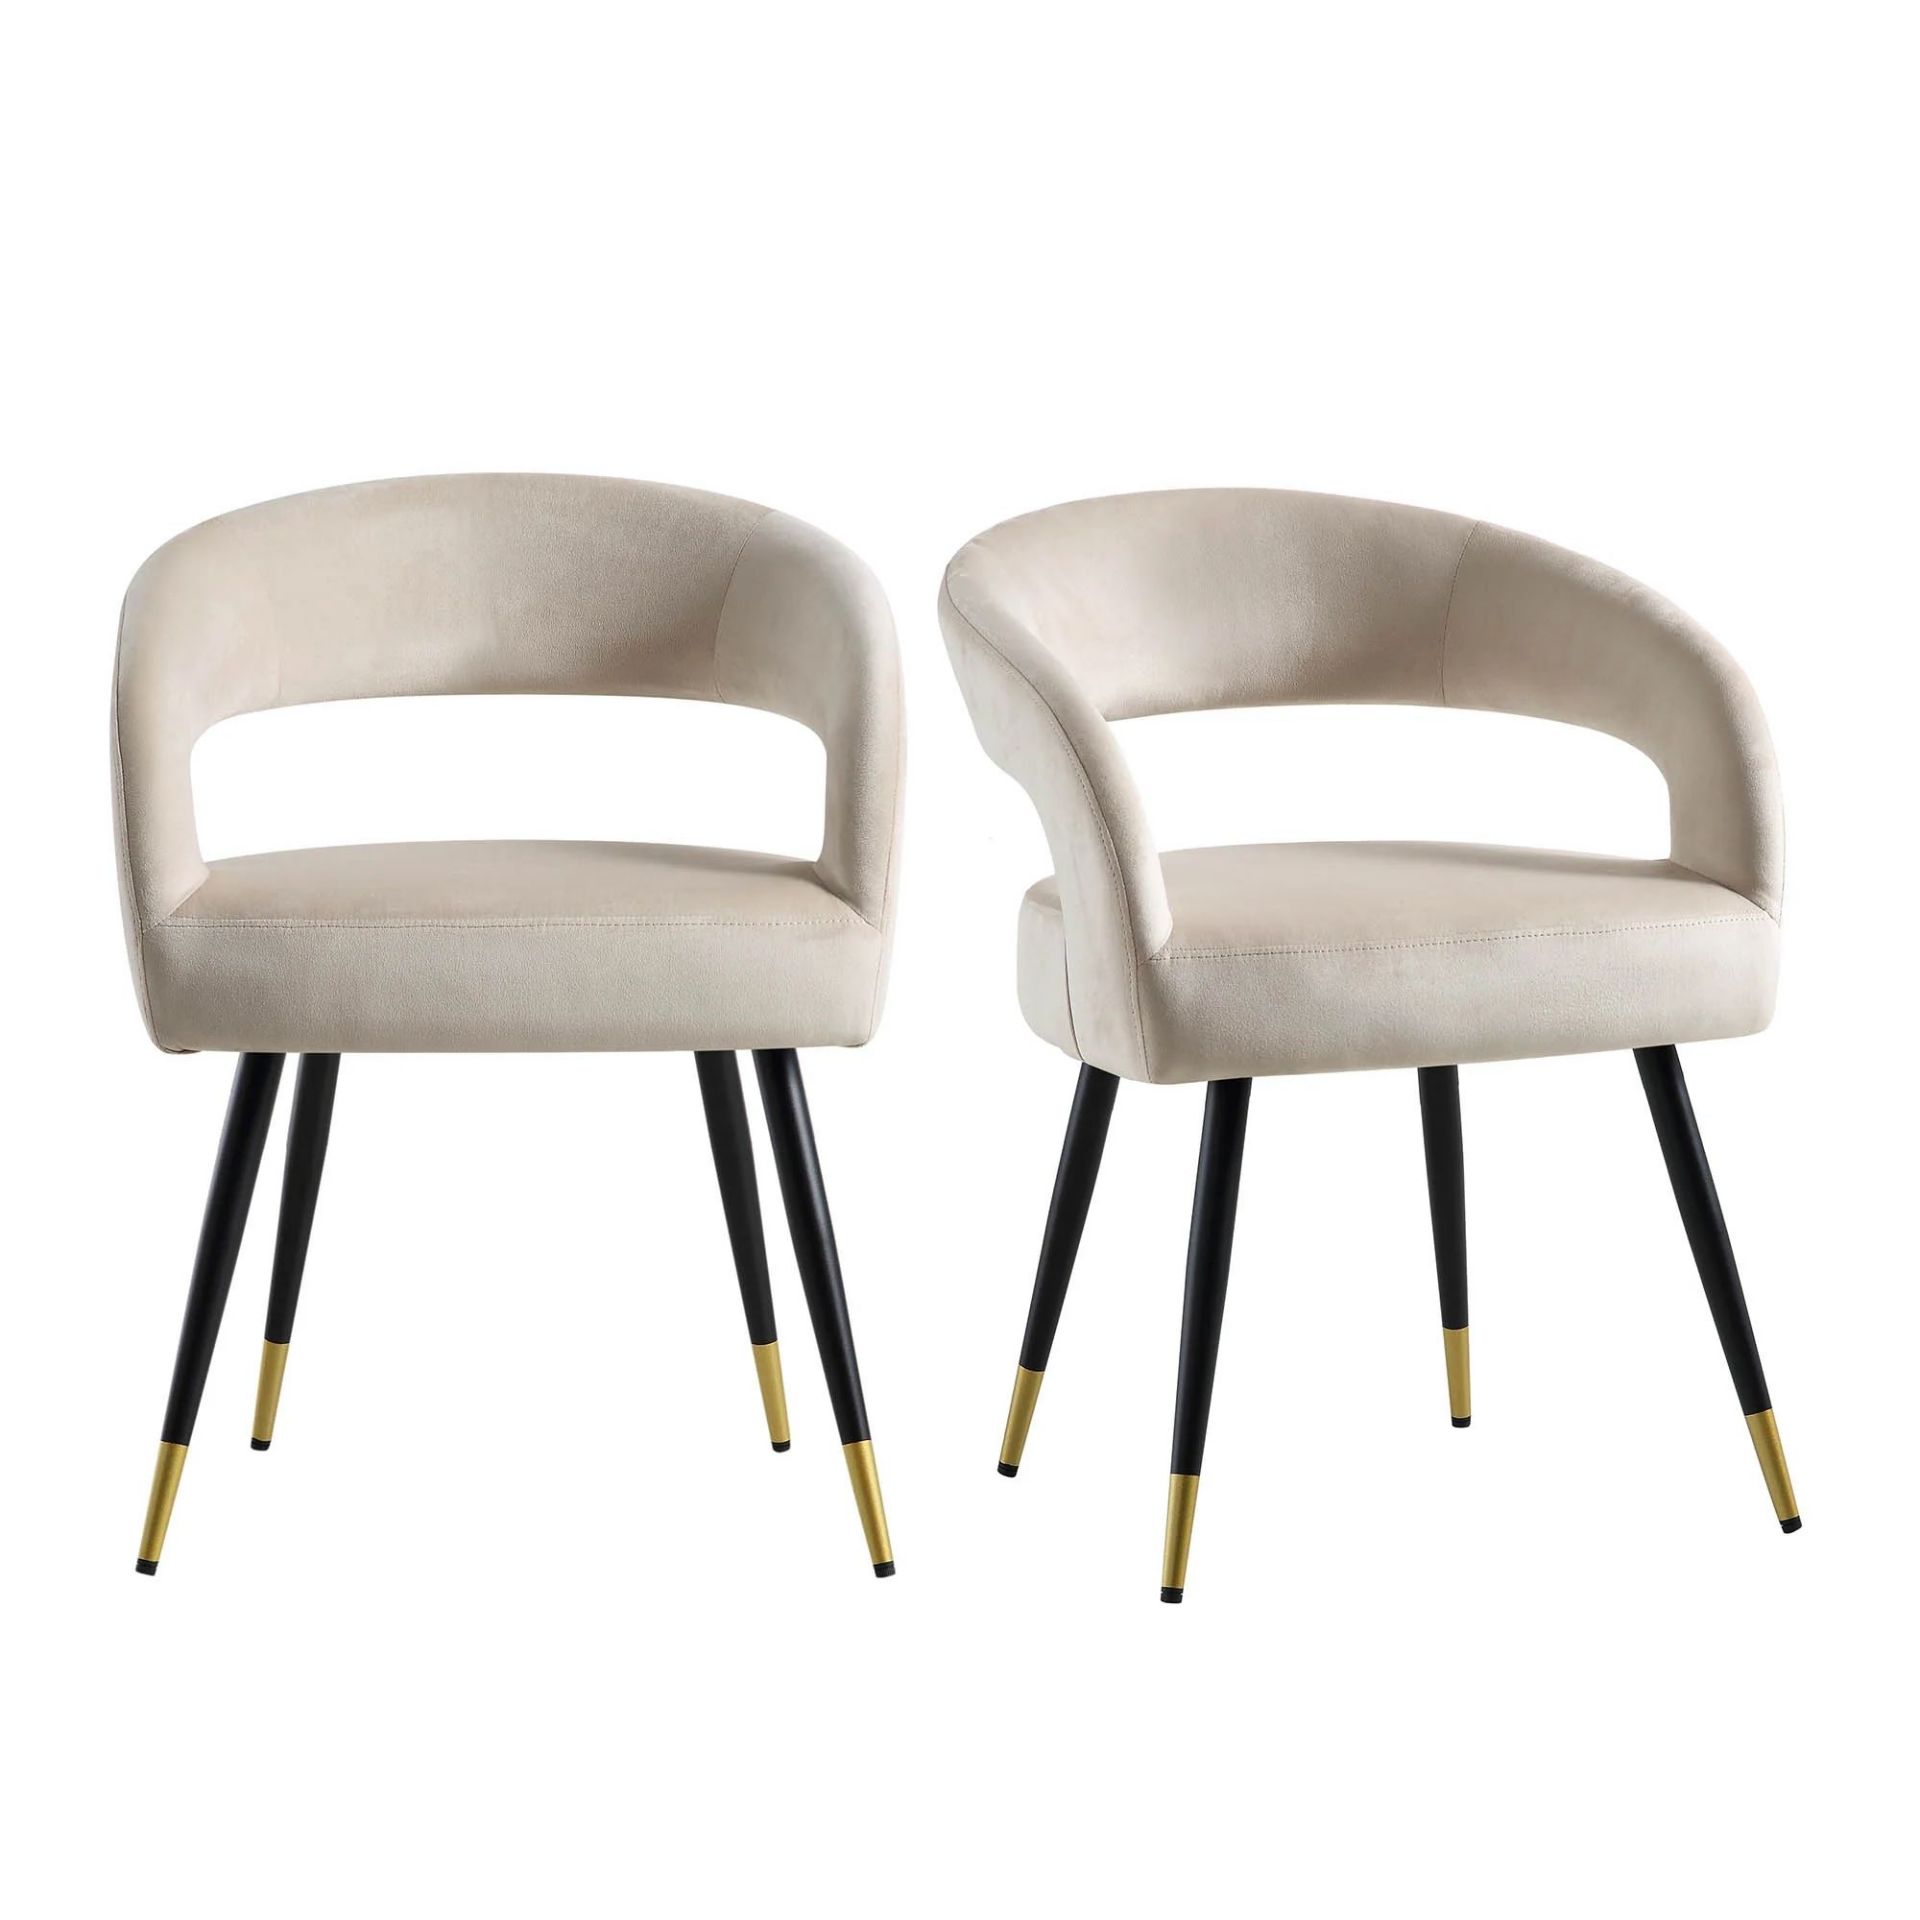 Laurel Wave Champagne Velvet Set of 2 Dining Chairs. - R14BW. RRP £259.99. The curved cut out - Image 2 of 4